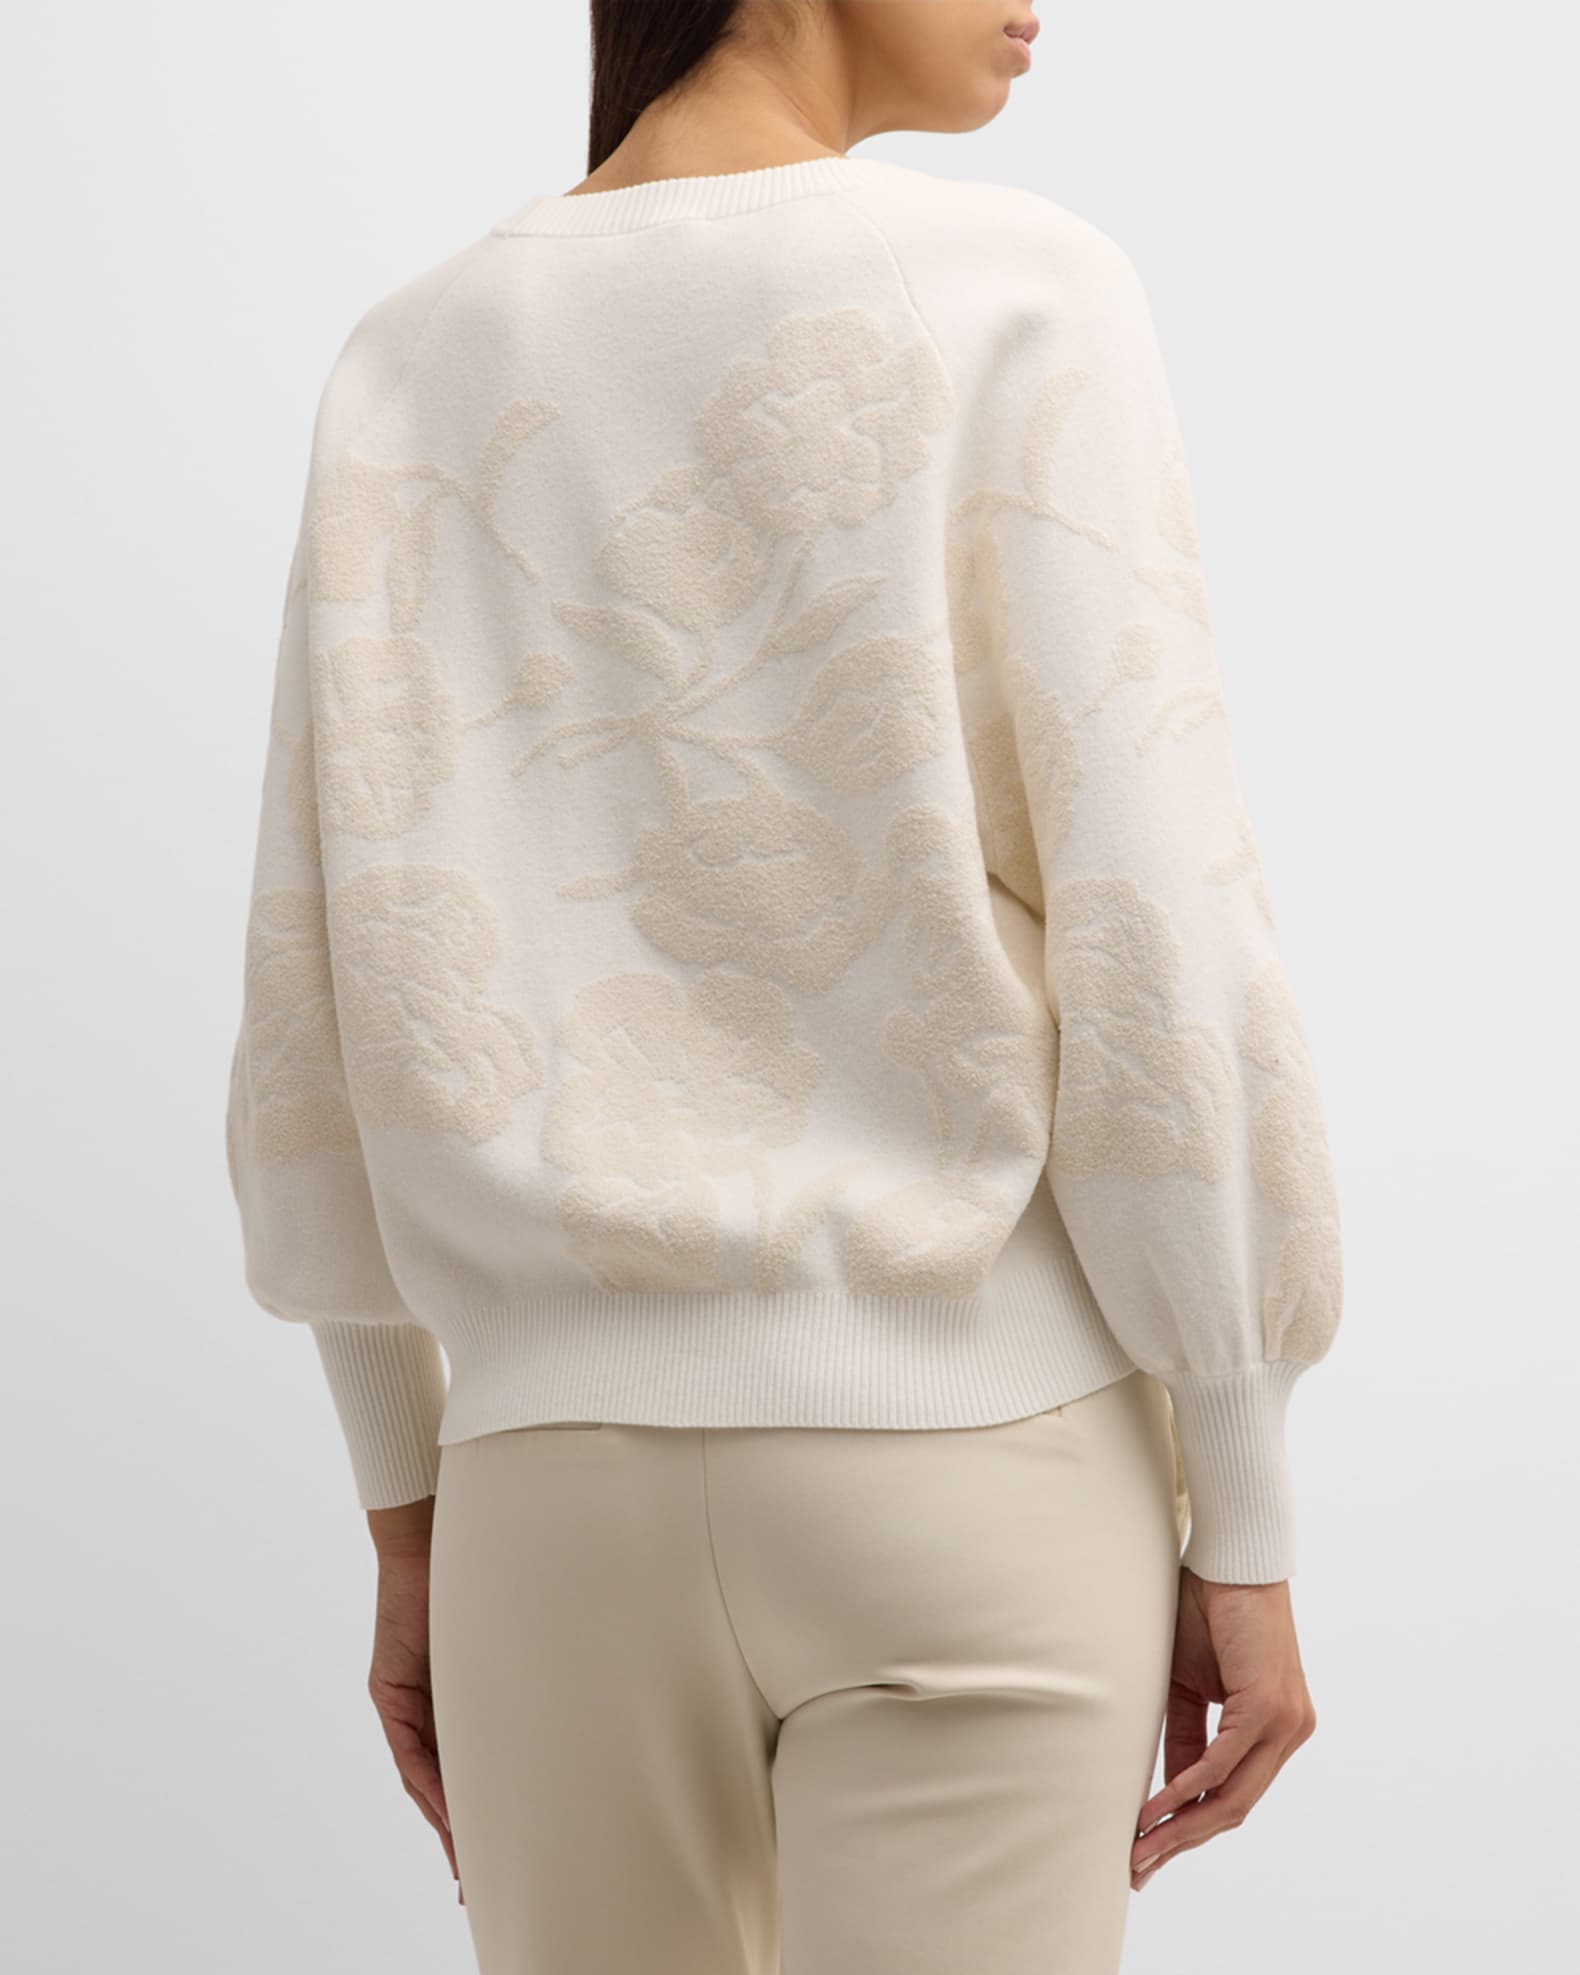 WynneCollection SoftKNIT Fractured Floral Jacquard Knit Sweater - 20844307